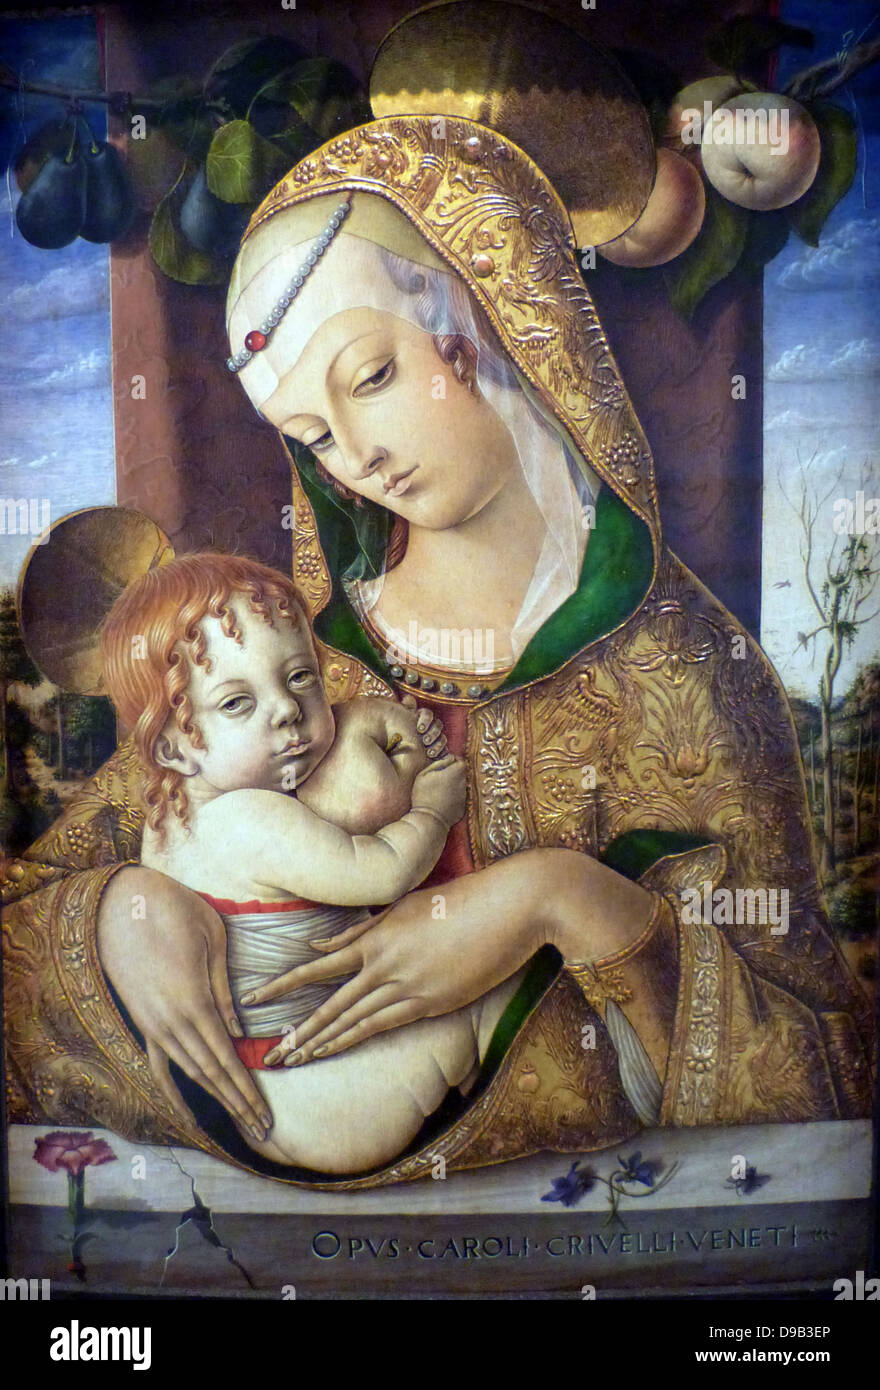 The Virgin and Child about 1480.  Carlo Crivelli (1430/5-94/5.  The artist uses perspective to create spatial depth but the medieval technique of raised gesso (plaster) for the pattern on the Virgin's robe.  Originally from Venice, Crivelli settled in the provincial town of Ascoli Picena, where his style must have seemed both strikingly new and comfortably familiar. Stock Photo